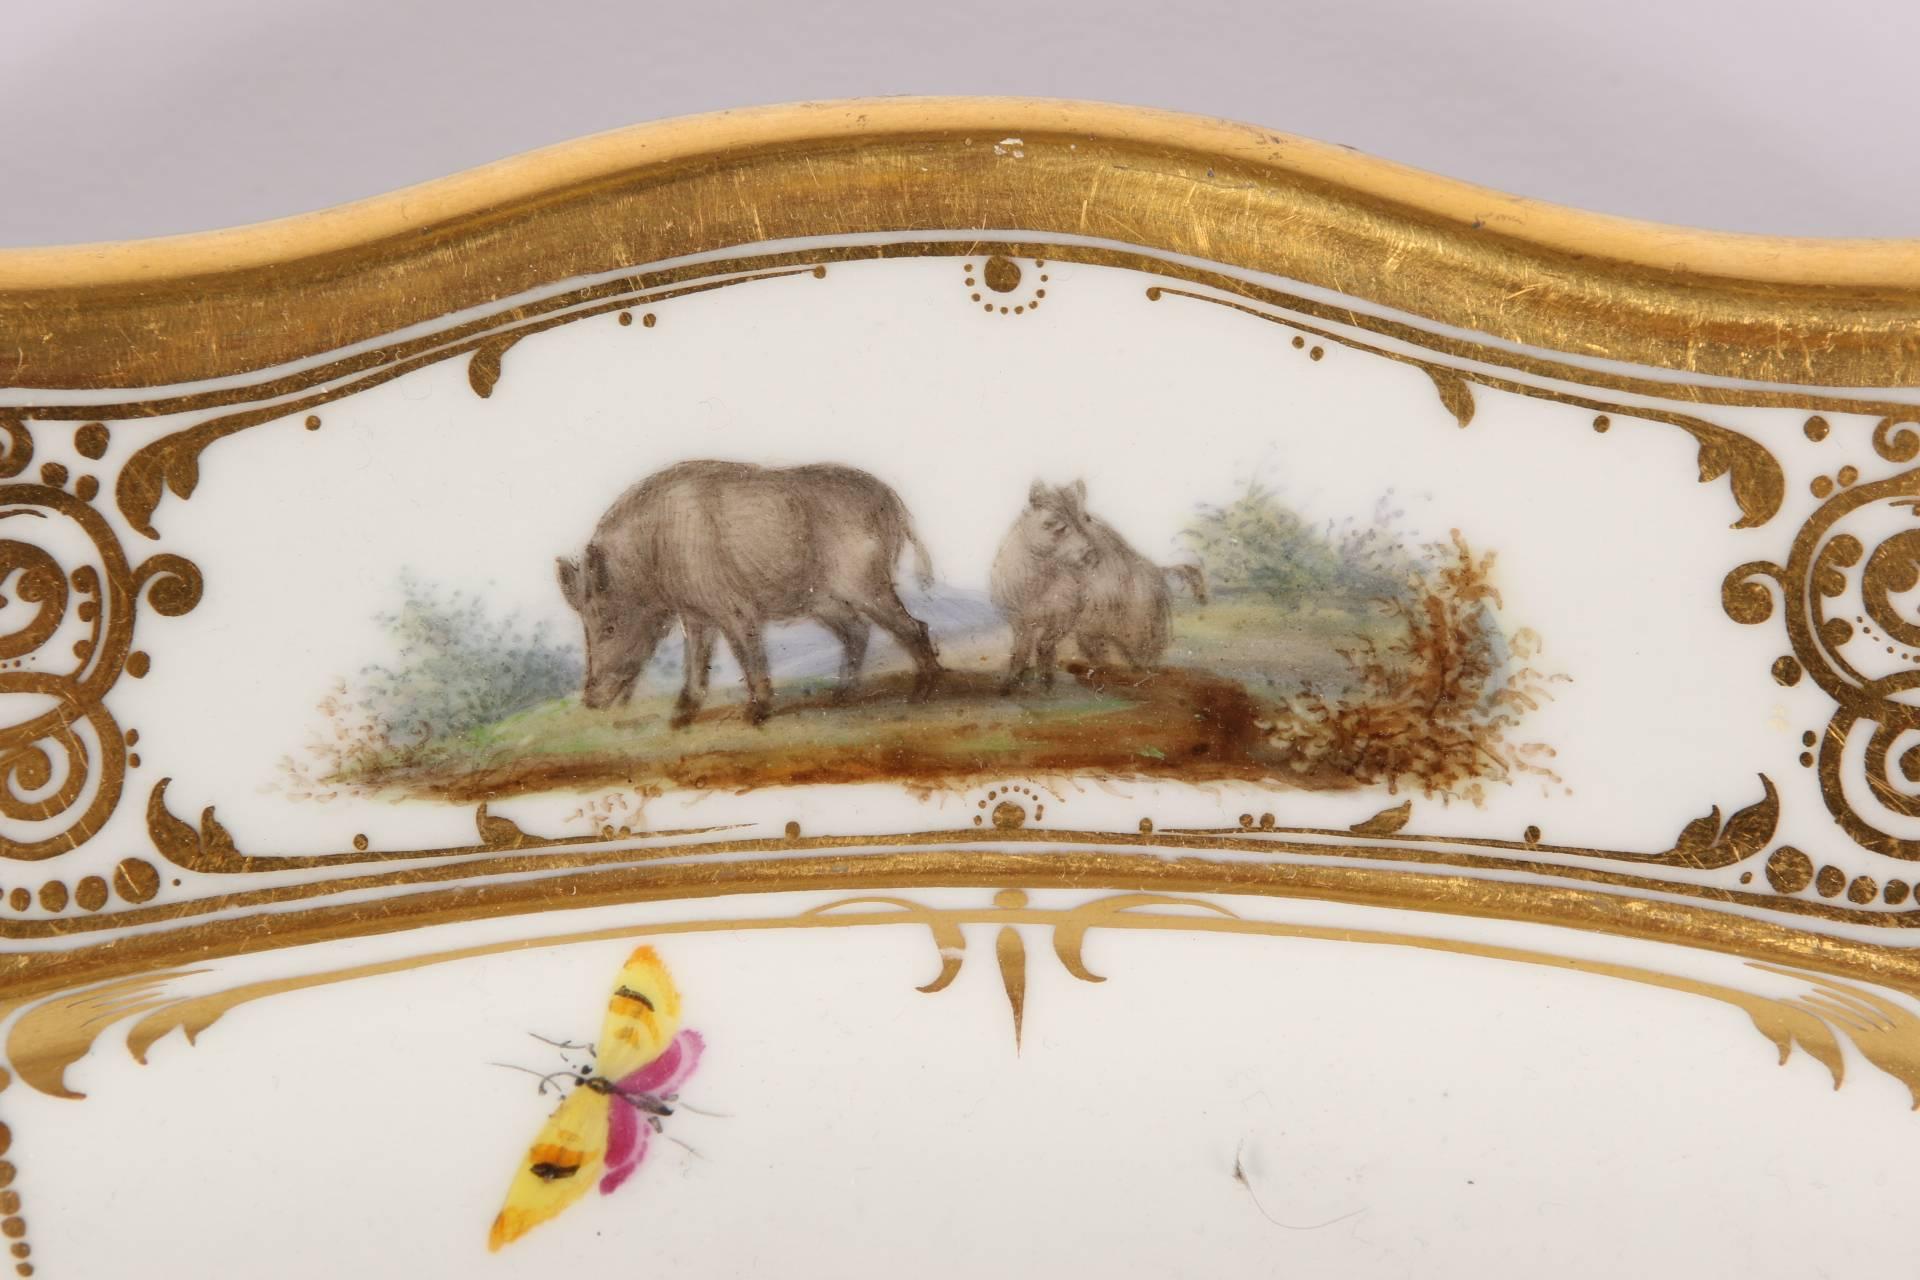 Probably custom-made oval form with gilt scalloped rim, the central scene depicting three boars in a forest clearing. The broad rim with four cartouches illustrating pairs of boars including babies, and one with a dog approaching a boar. Gilt